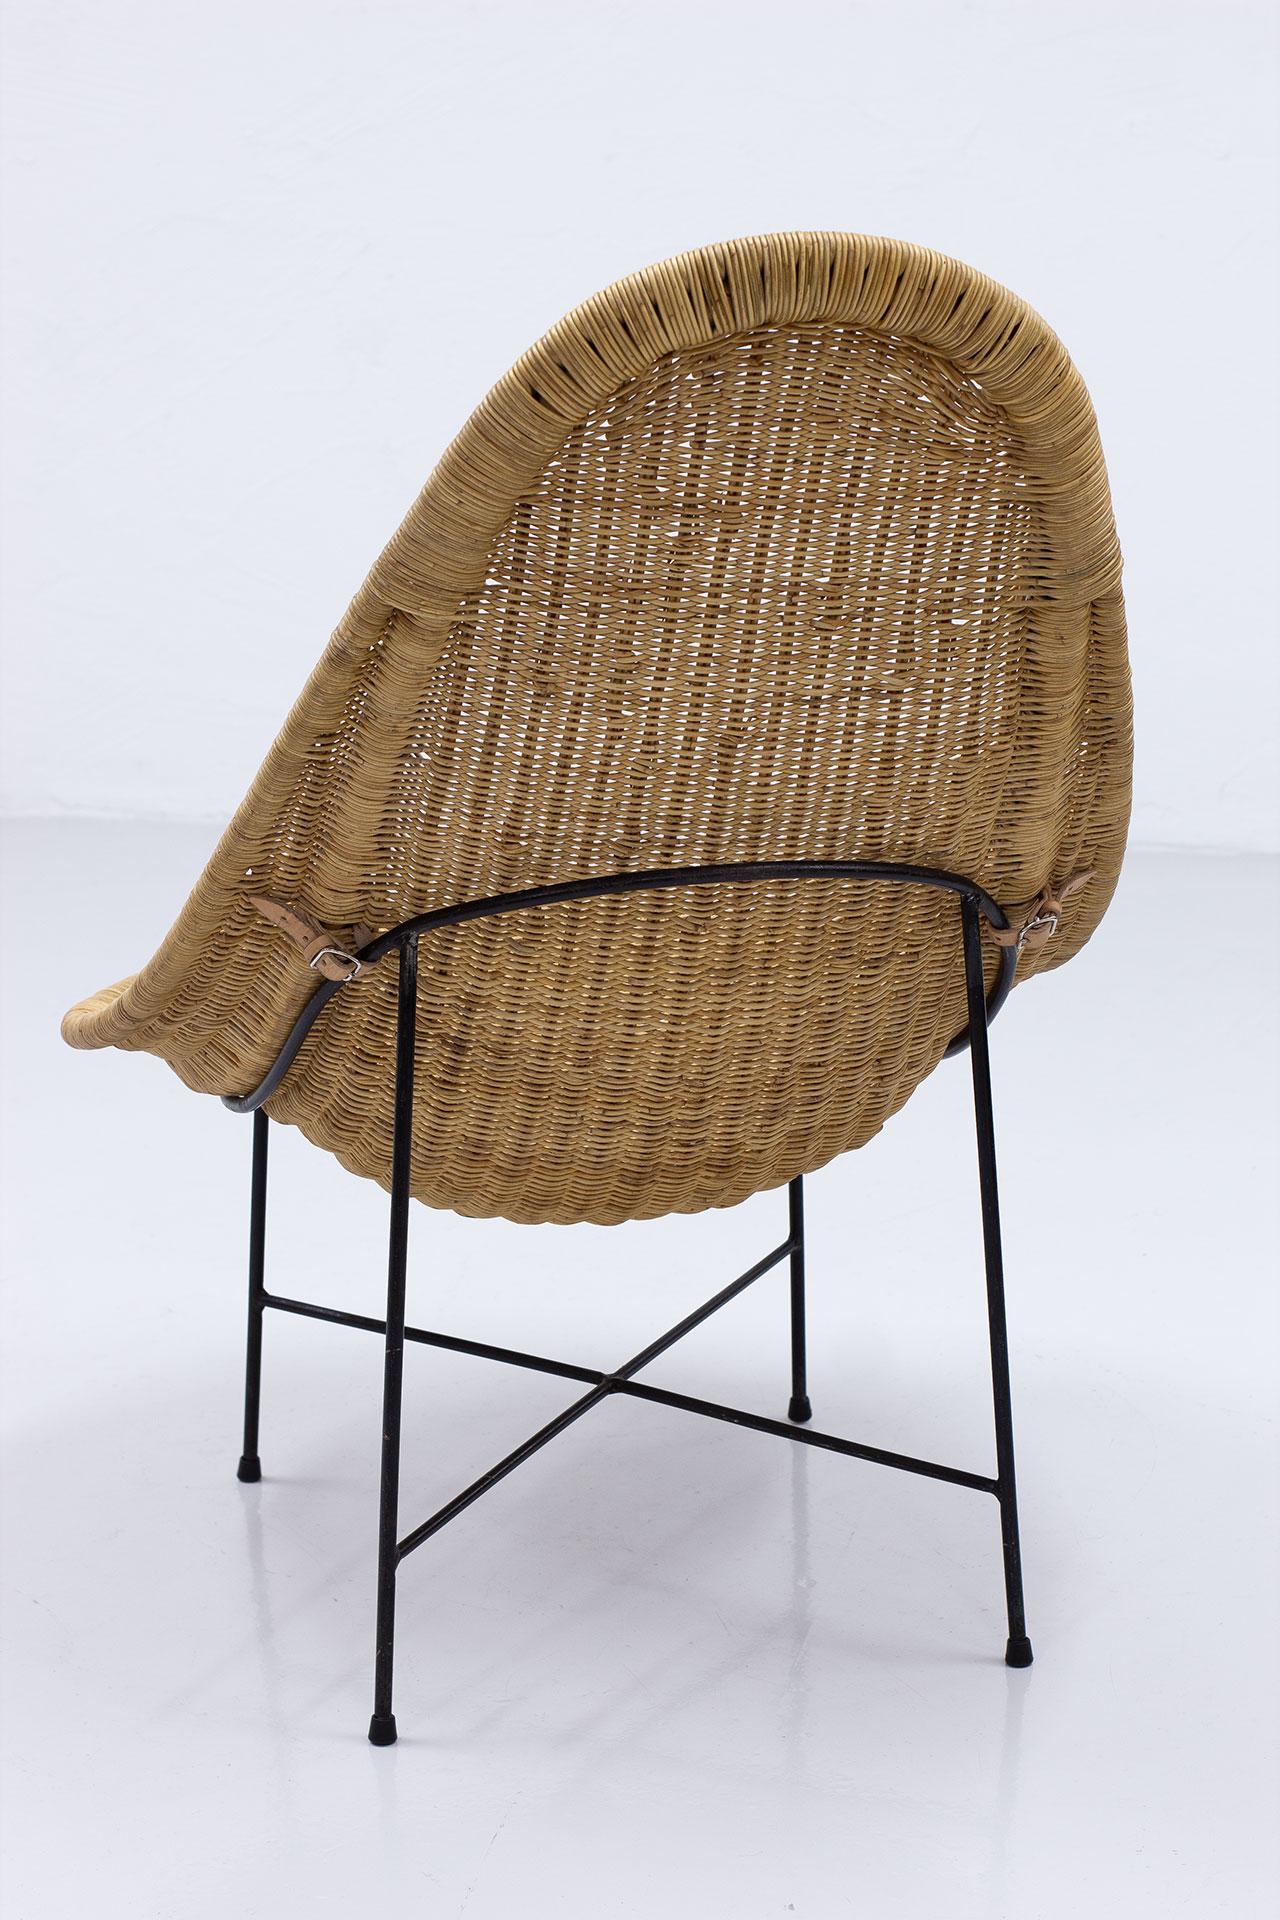 'Stora Kraal' Lounge Chair in Woven Cane by Kerstin Hörlin Holmquist, Sweden For Sale 1